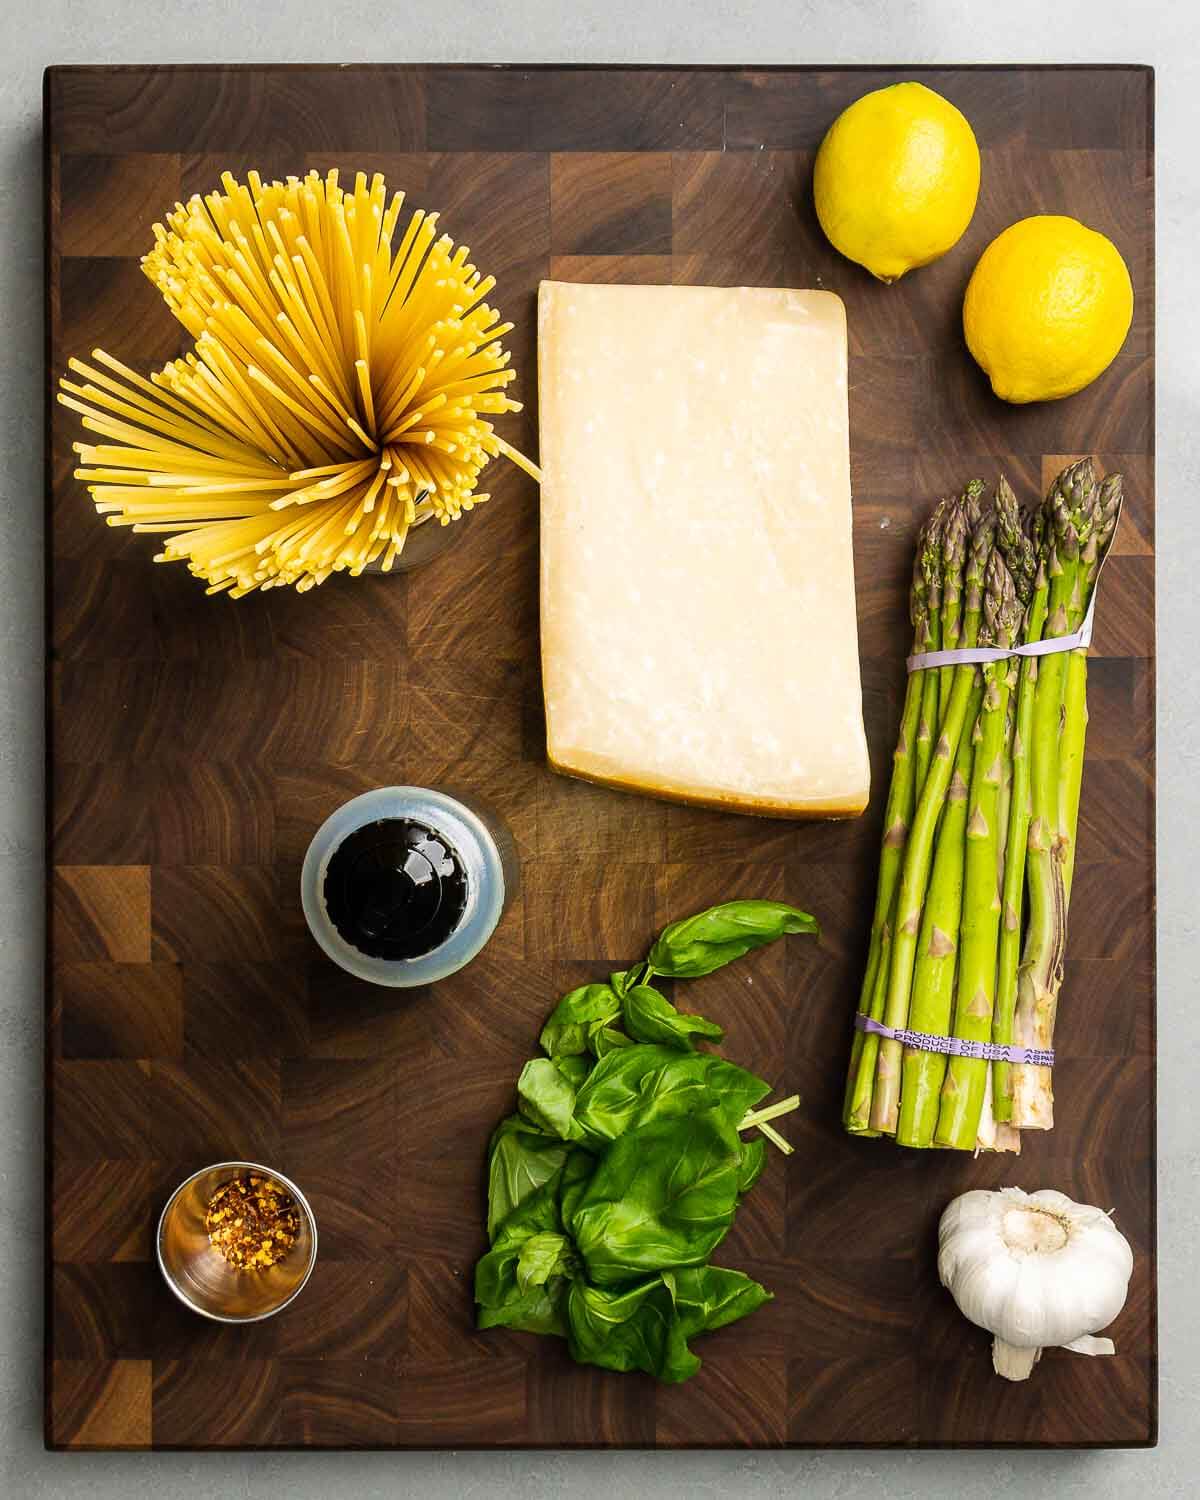 Ingredients shown: spaghetti, parmesan, lemons, asparagus, olive oil, hot red pepper flakes, basil, and garlic.